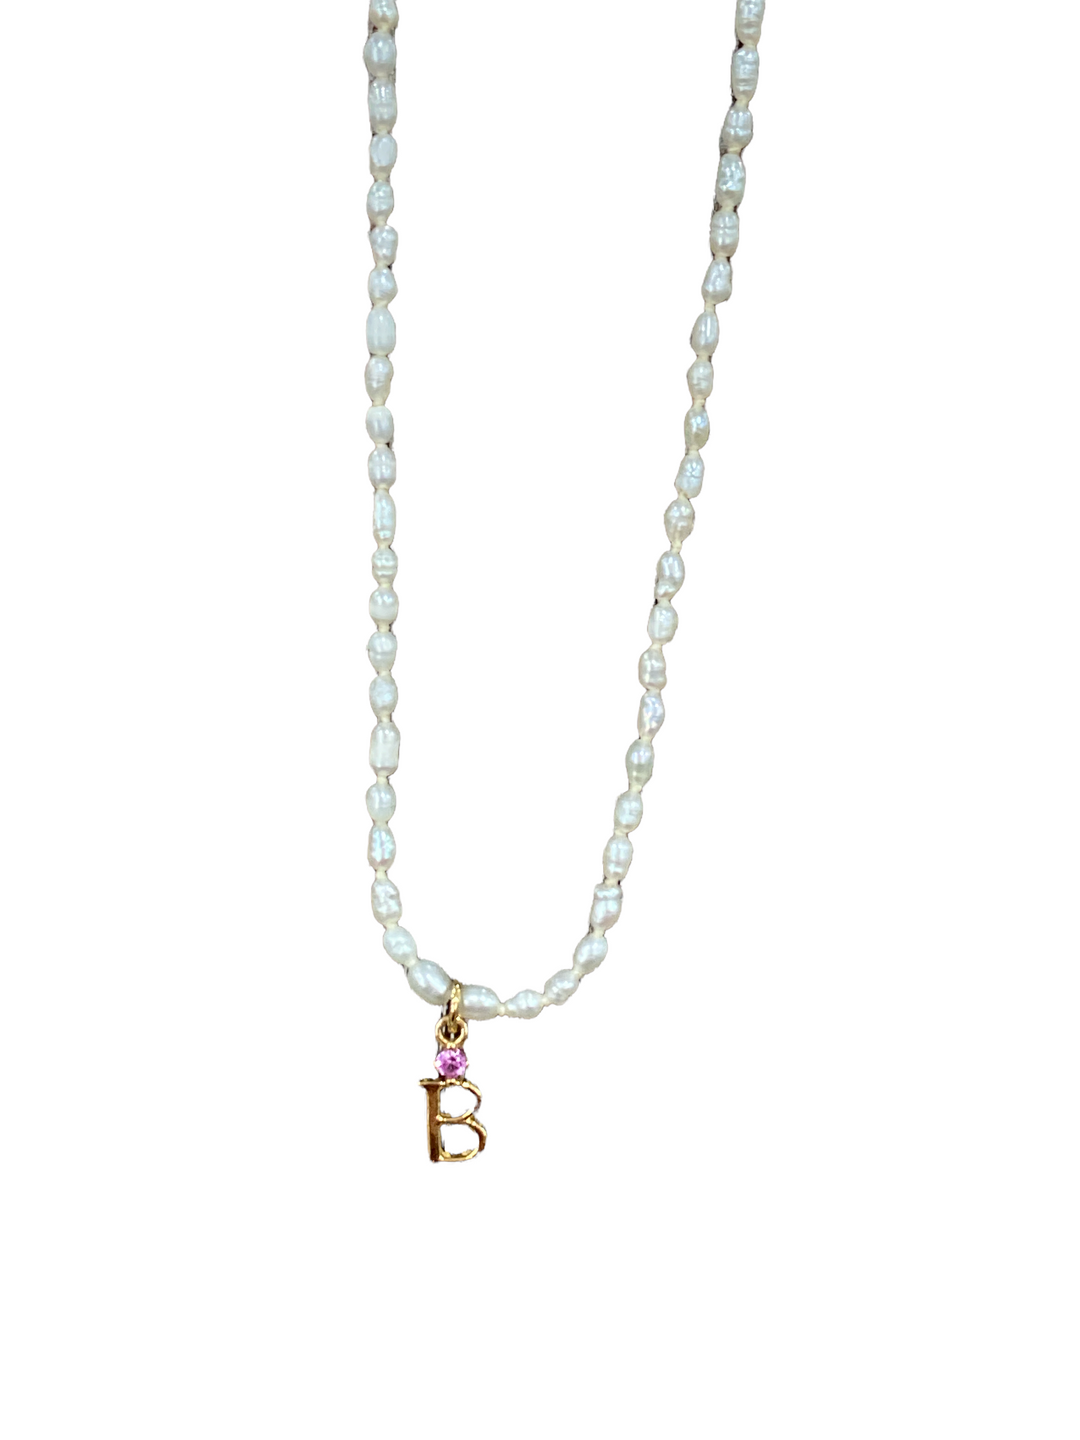 FRESH WATER PEARL BEAD INITIAL CHARM NECKLACE - Kingfisher Road - Online Boutique